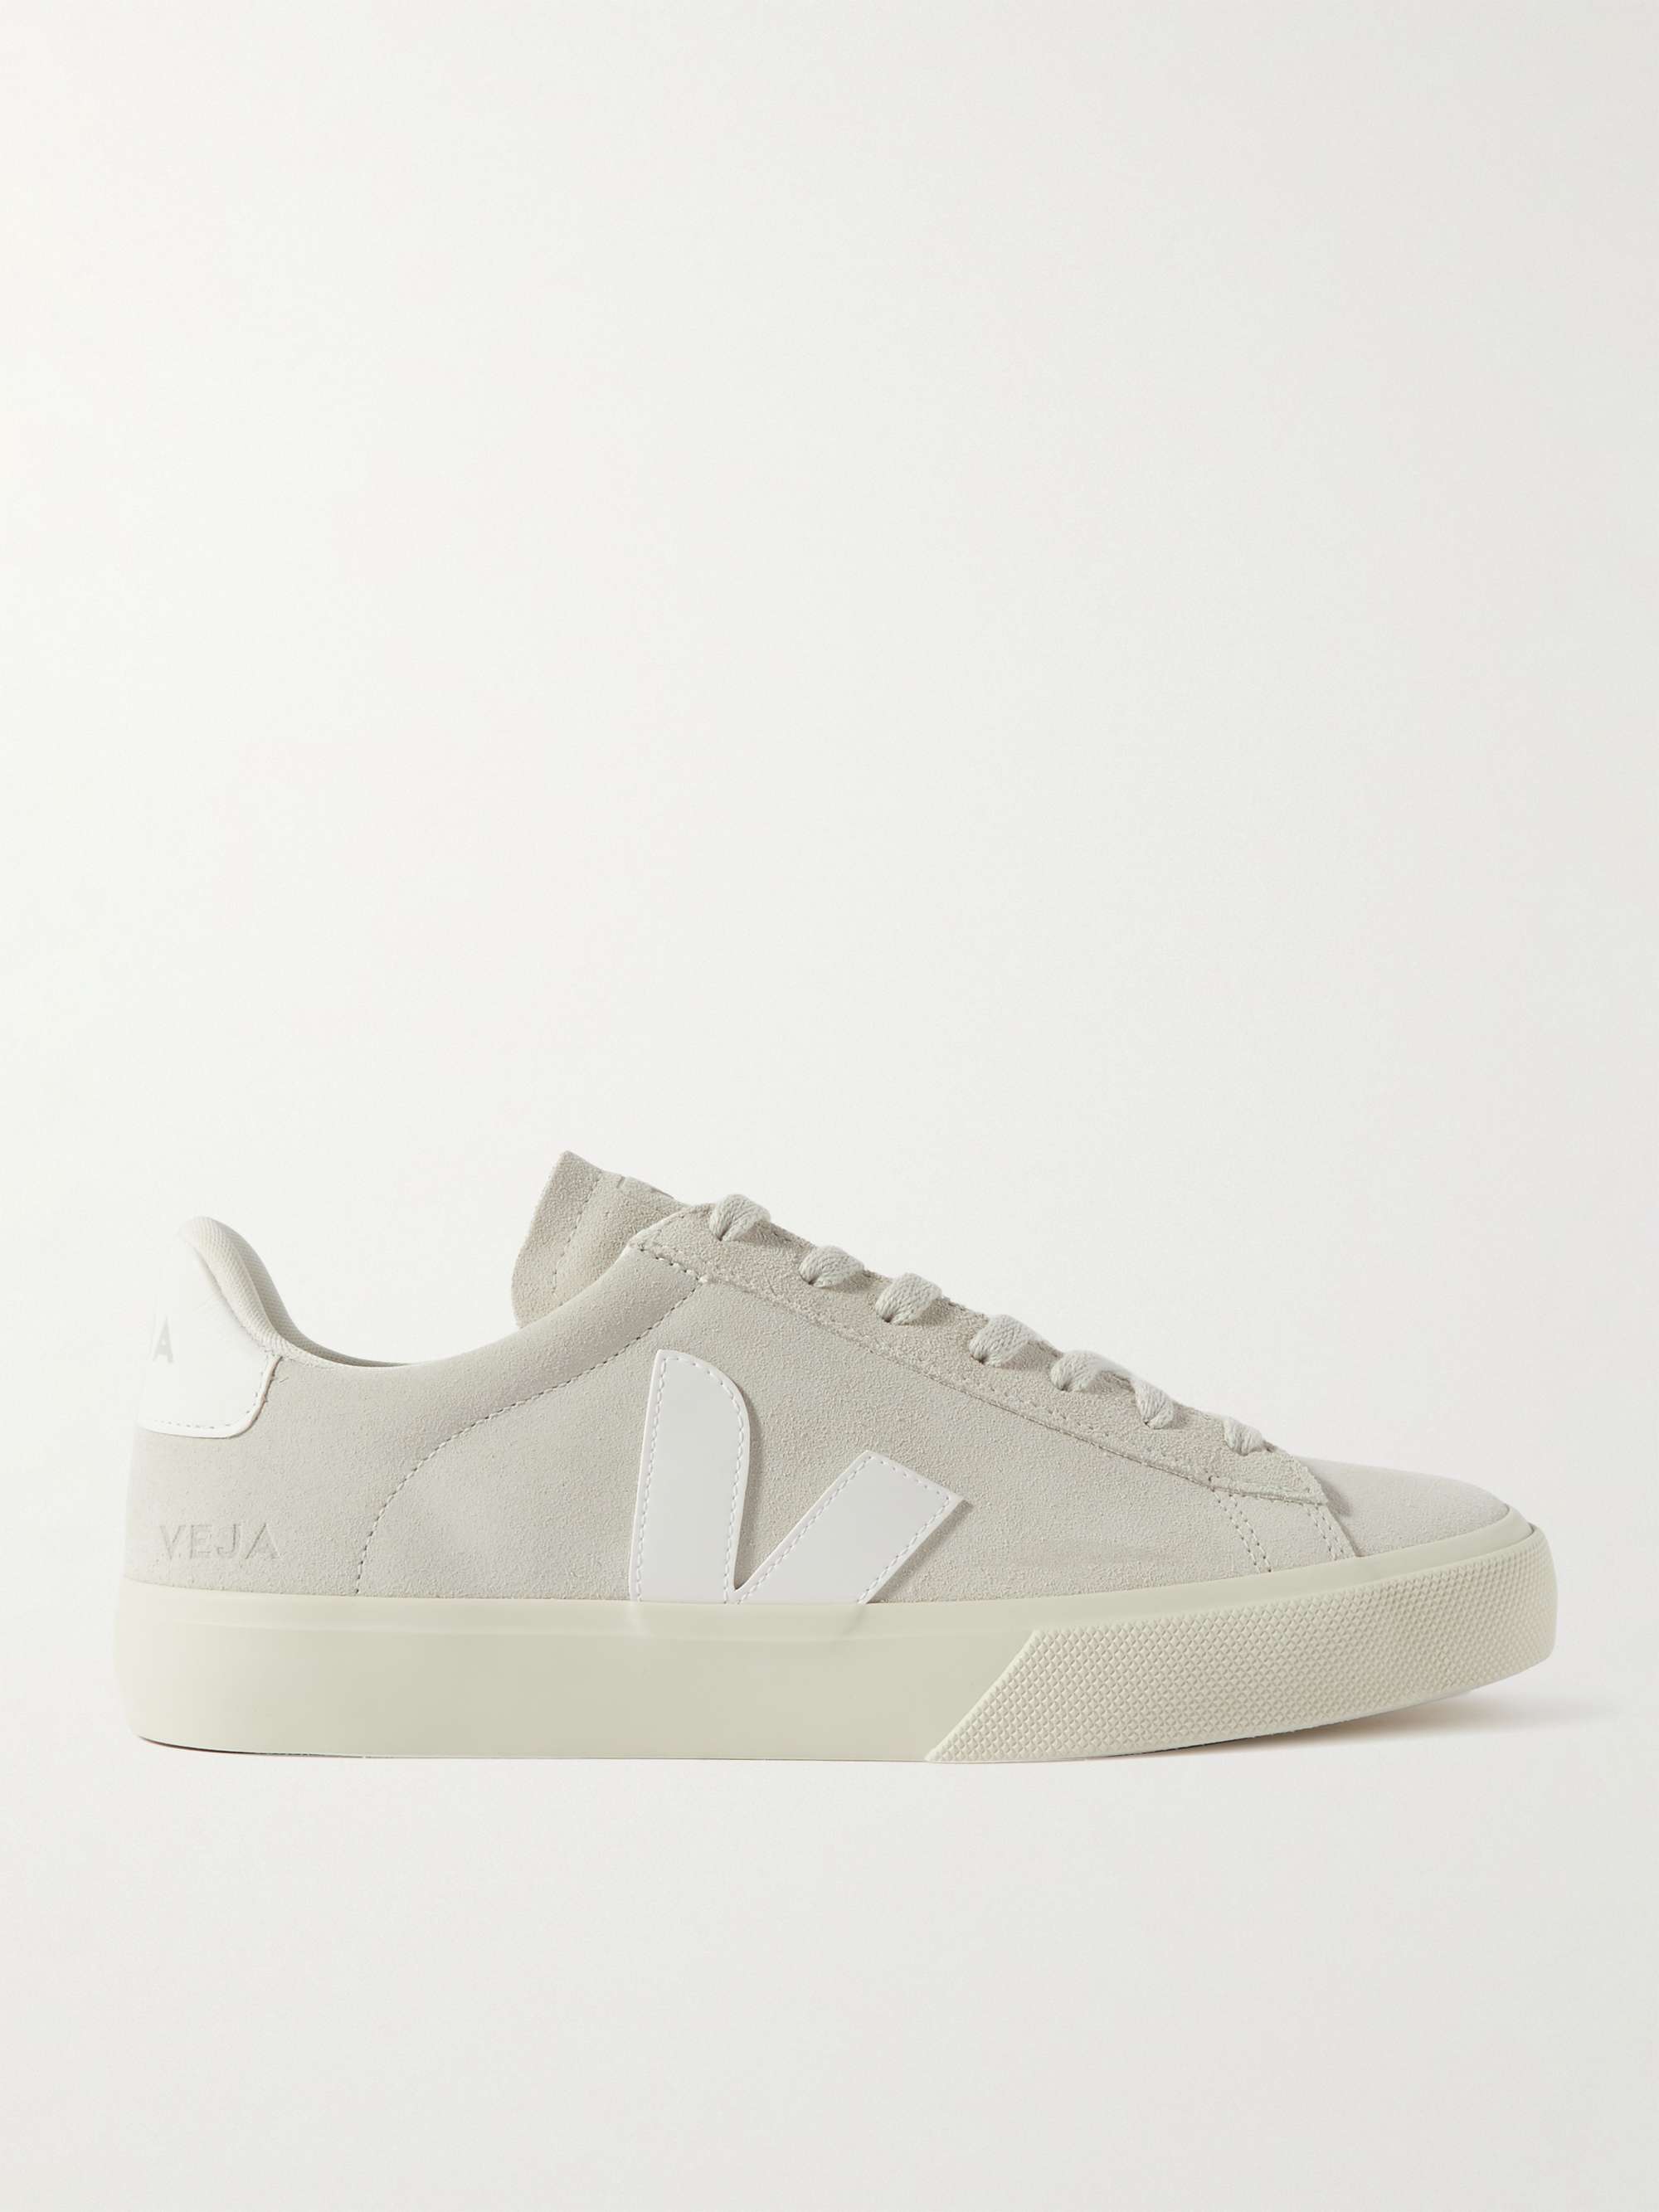 VEJA Campo Leather-Trimmed Suede Sneakers | MR PORTER